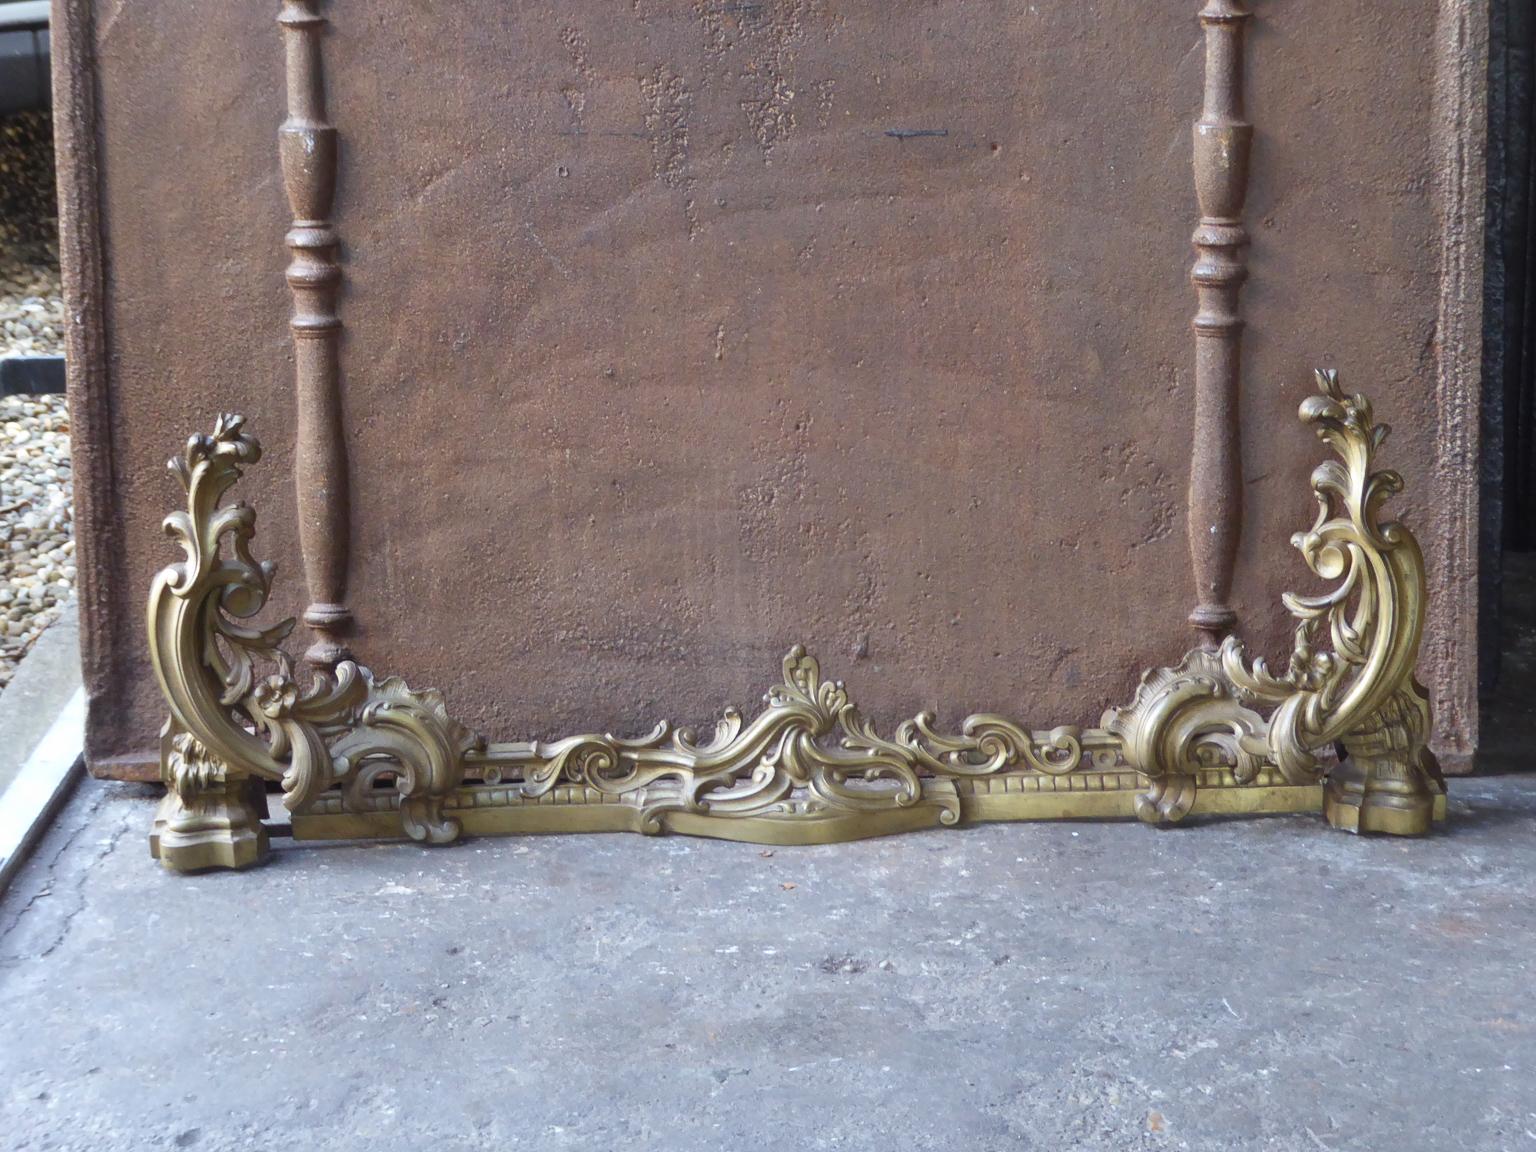 19th century French Louis XV style fire fender made of brass and wrought iron.







   